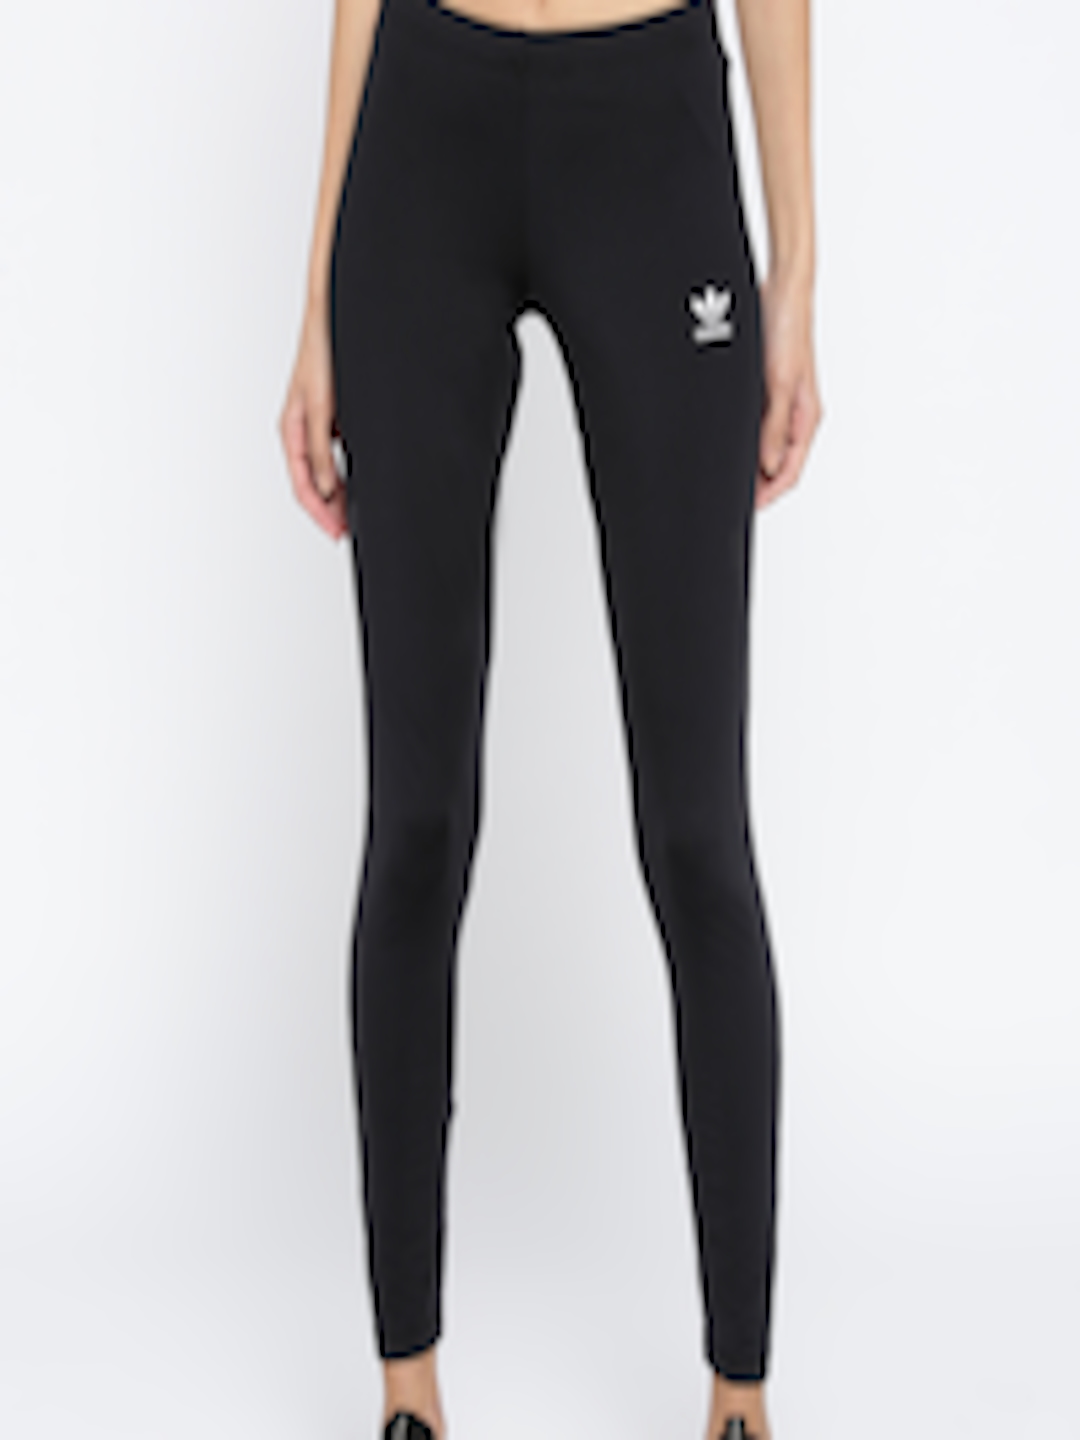 Buy ADIDAS Women Black Solid Tights - Tights for Women 7401277 | Myntra